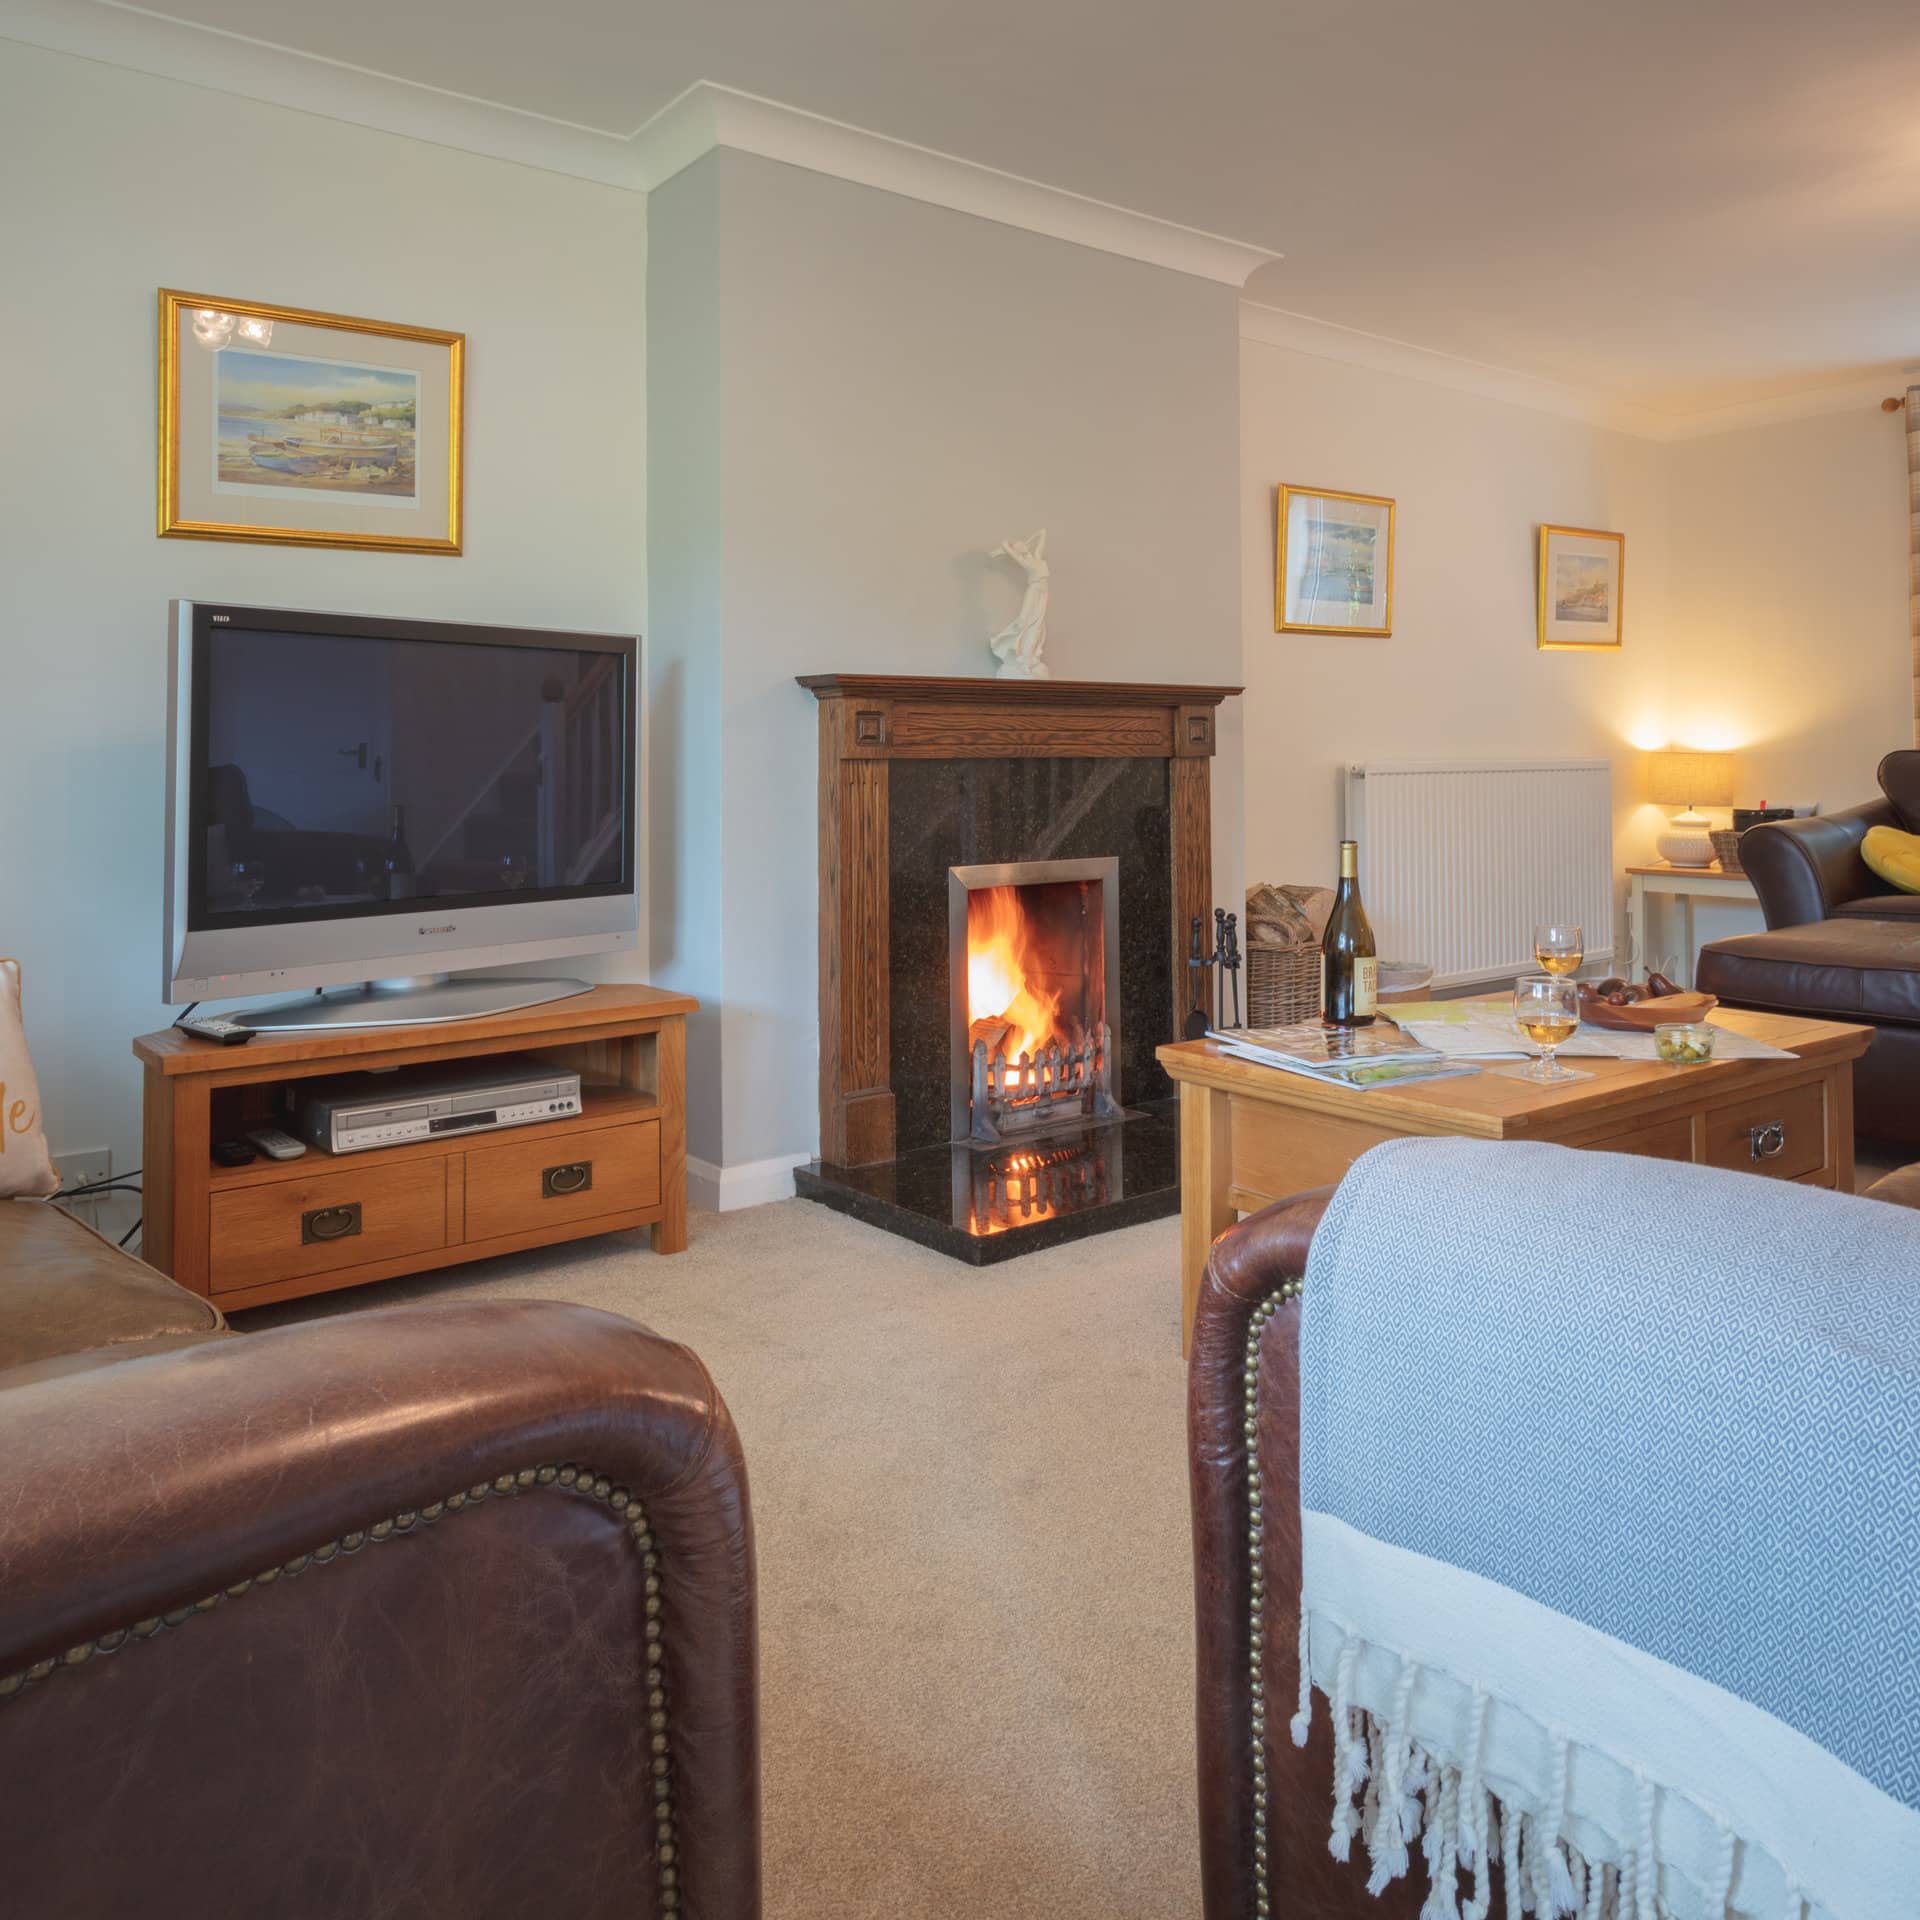 orchard house, cliff house, farm, holiday cottages, sleeps 6, self catering holiday cottages